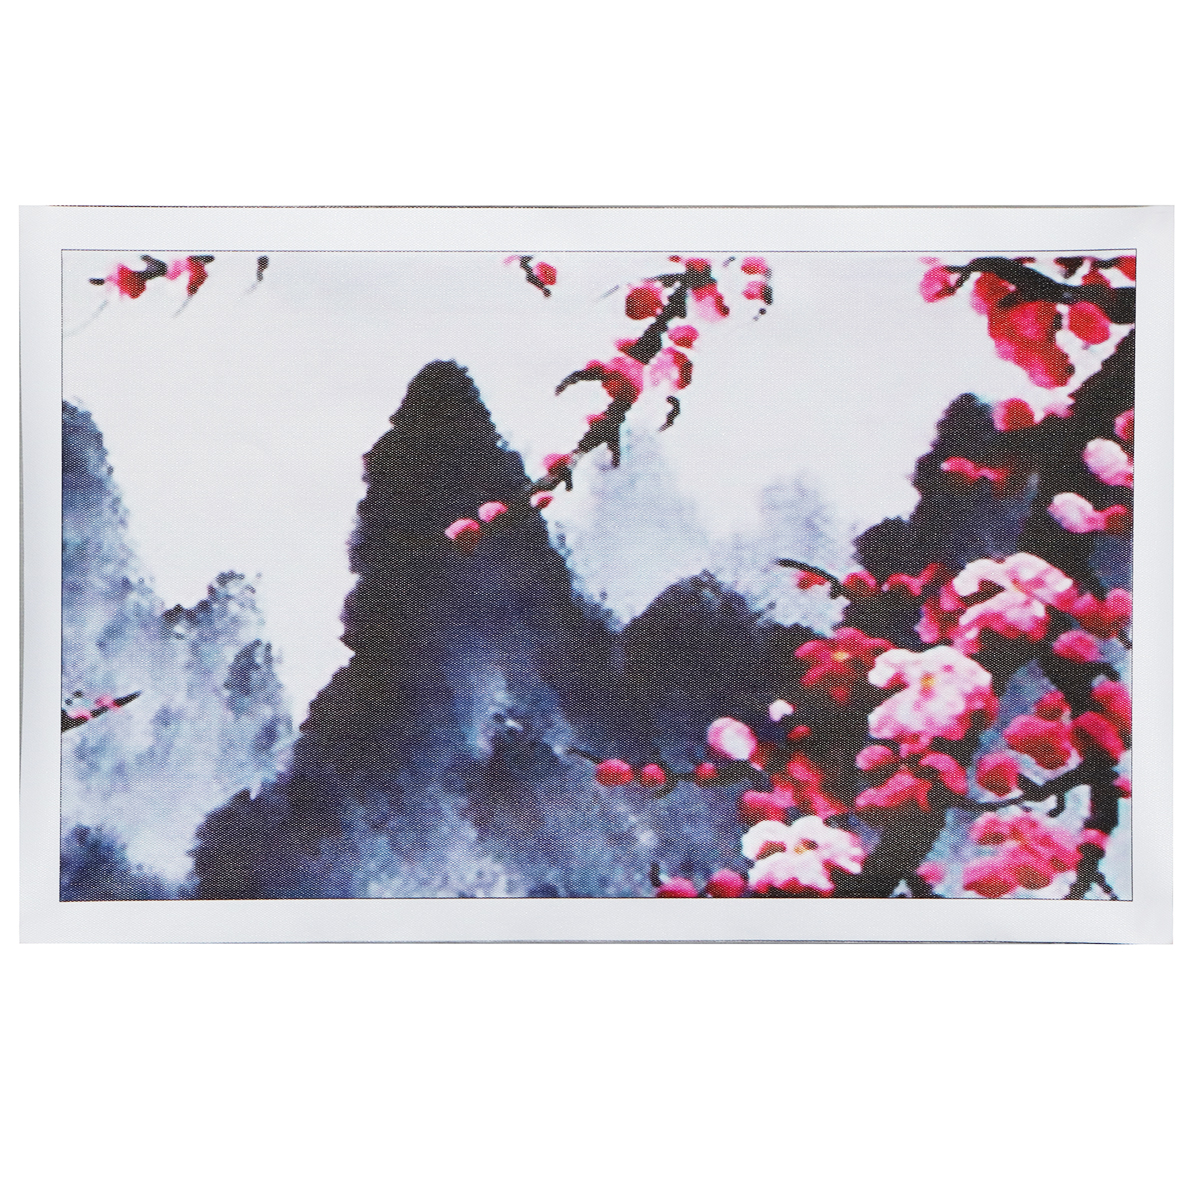 4-Pcs-Wall-Decorative-Painting-Modern-Abstract-Wall-Decor-Plum-Blossom-Art-Pictures-Canvas-Prints-Ho-1319561-10